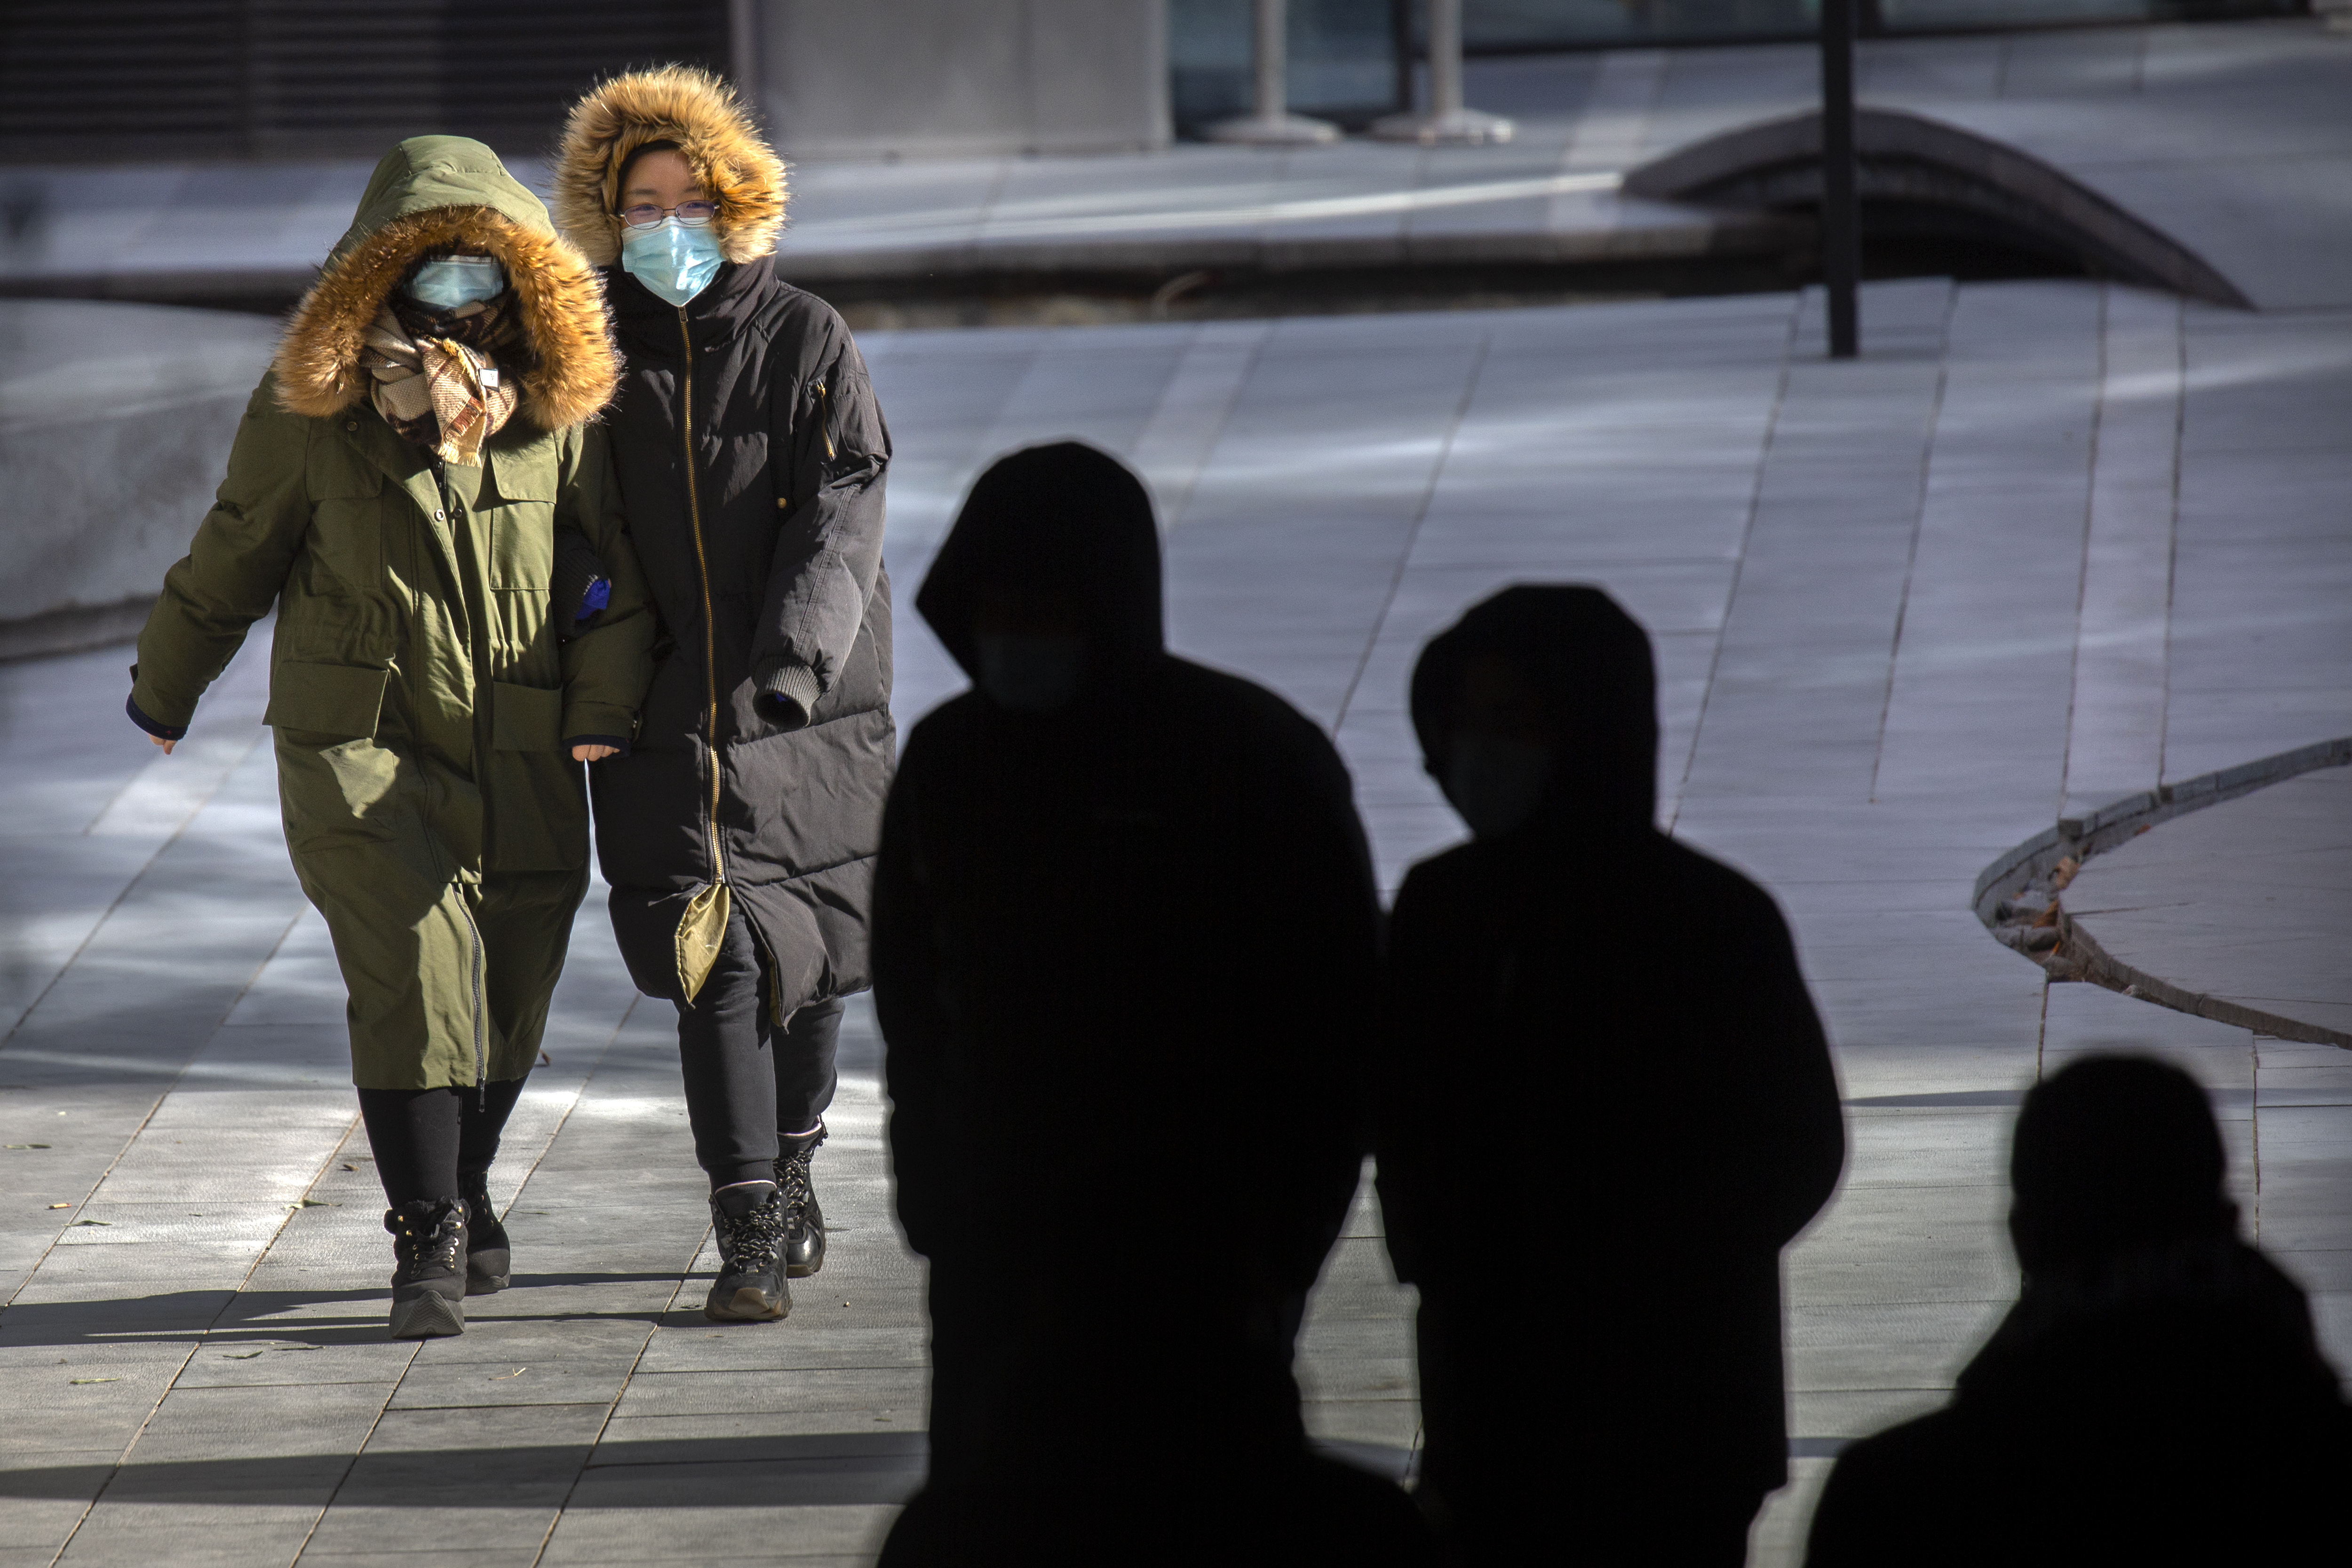 People wearing face masks to protect against the coronavirus walk on an unseasonably cold day at an office and shopping complex in Beijing, Wednesday, Jan. 6, 2021. China's Hebei province is enforcing stricter control measures following a further rise in coronavirus cases in the province, which is adjacent to the capital Beijing and is due to host events for next year's Winter Olympics. (AP Photo/Mark Schiefelbein)